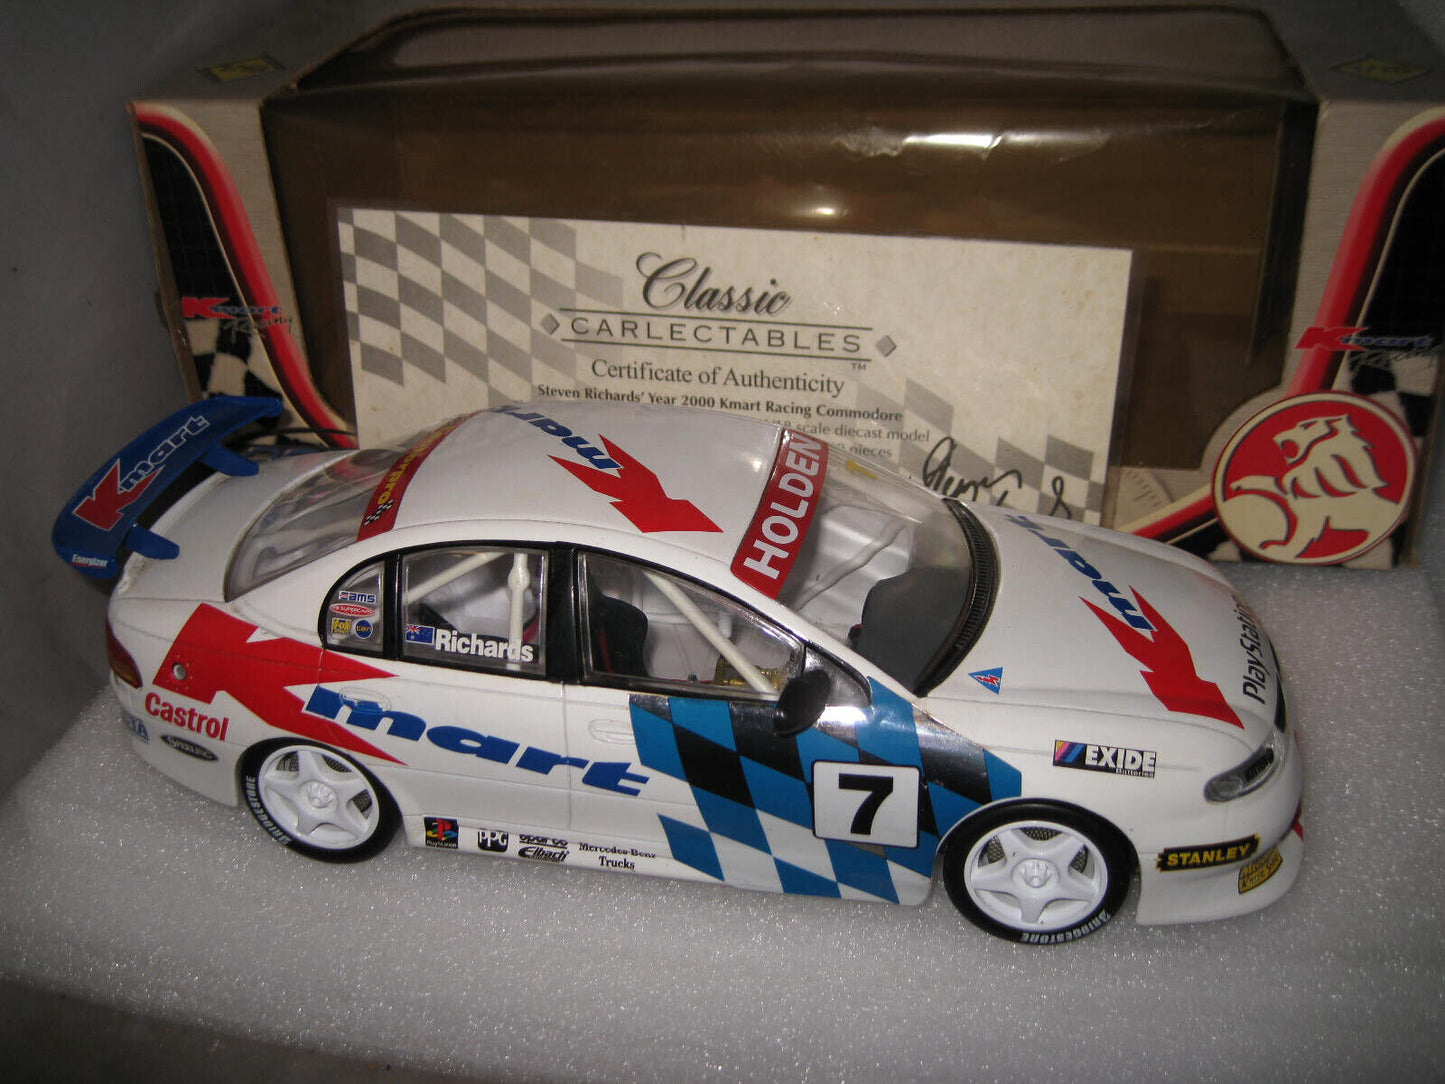 EARLY CLASSIC 1/18 HOLDEN COMMODORE STEVEN RICHARDS KMART RACING 2000 #7 #18008